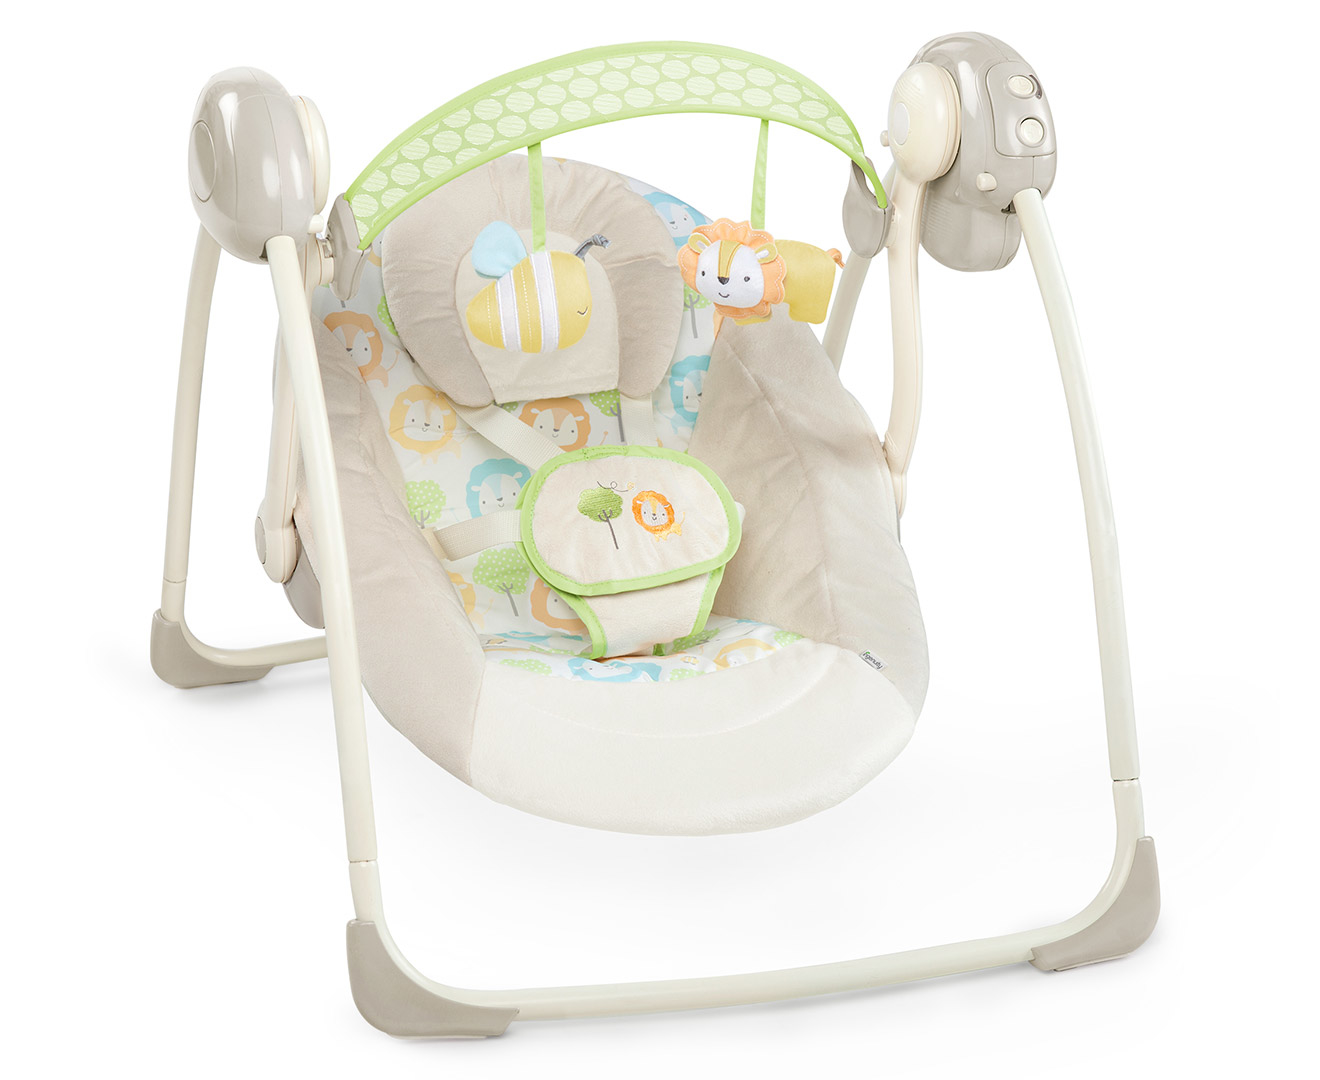 Ingenuity Soothe 'n Delight Portable Swing - Sunny Snuggles